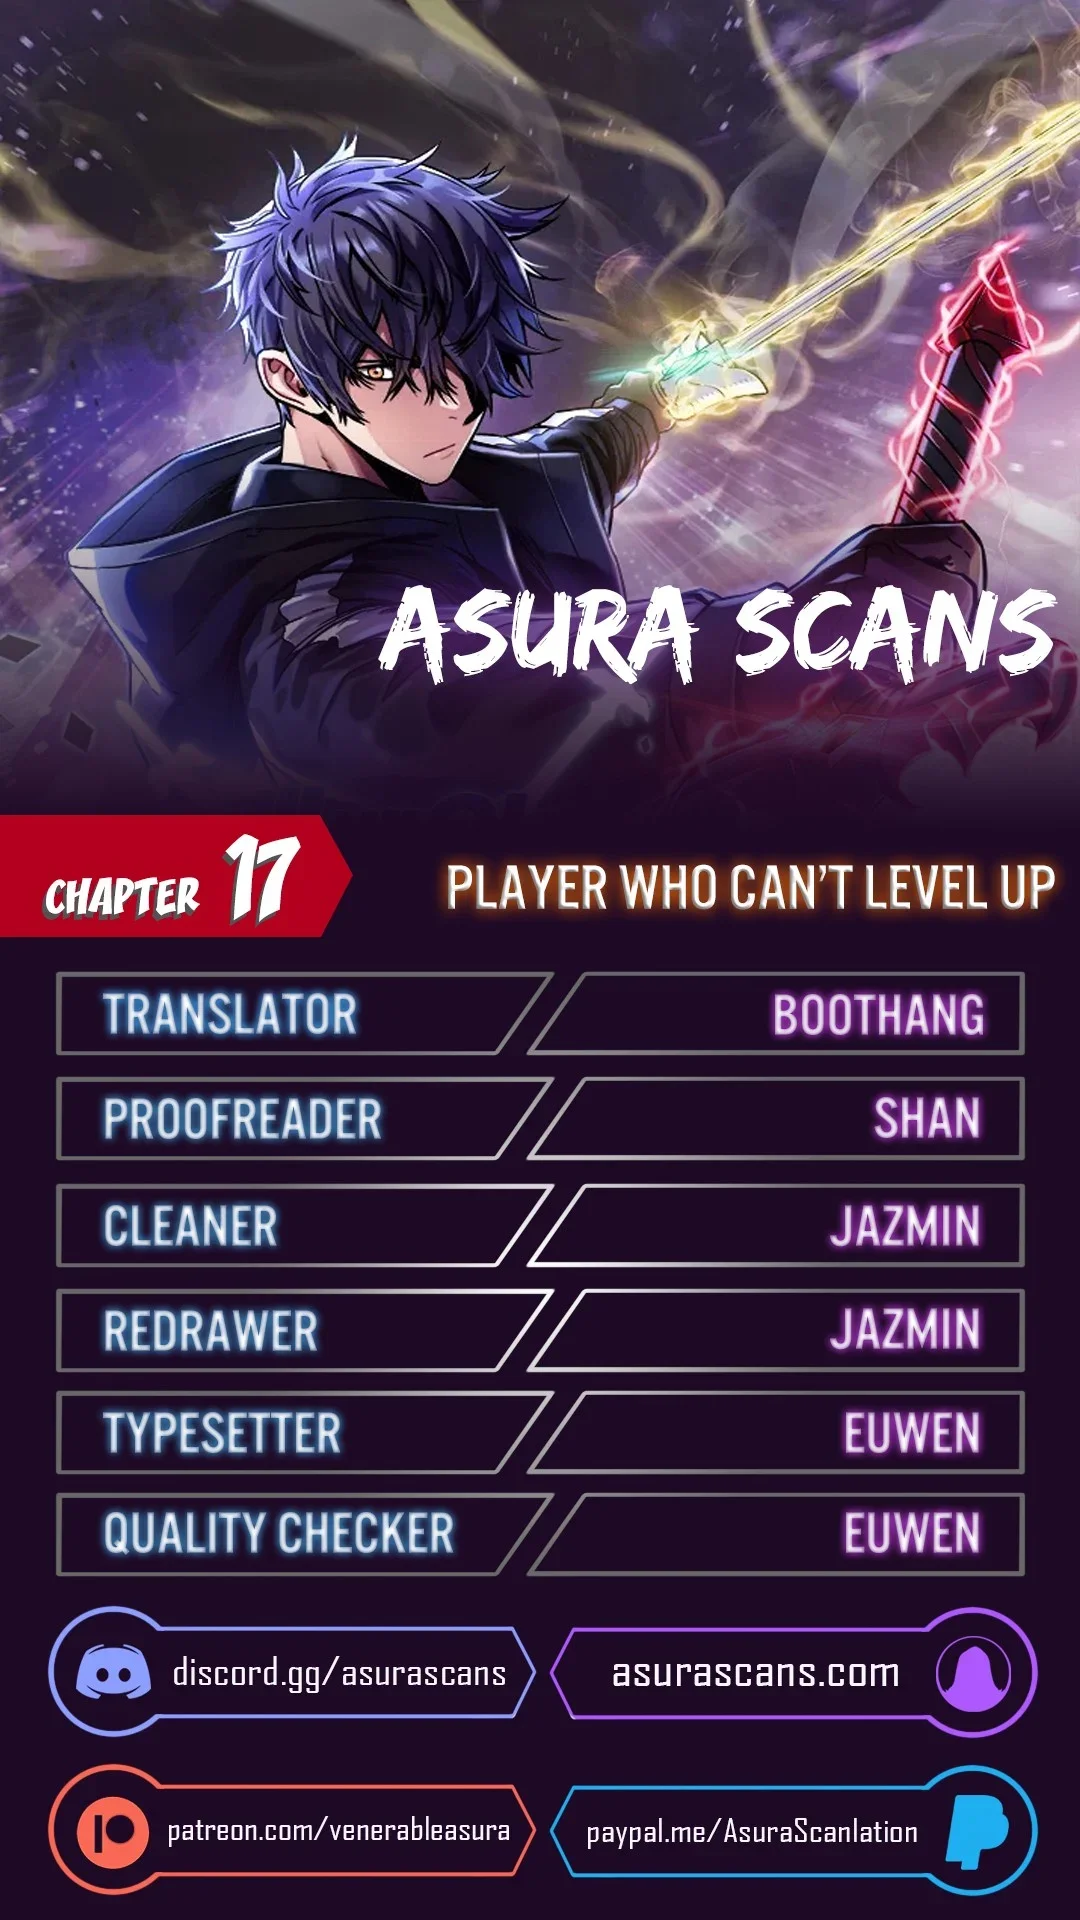 player-who-cant-level-up-chap-17-0